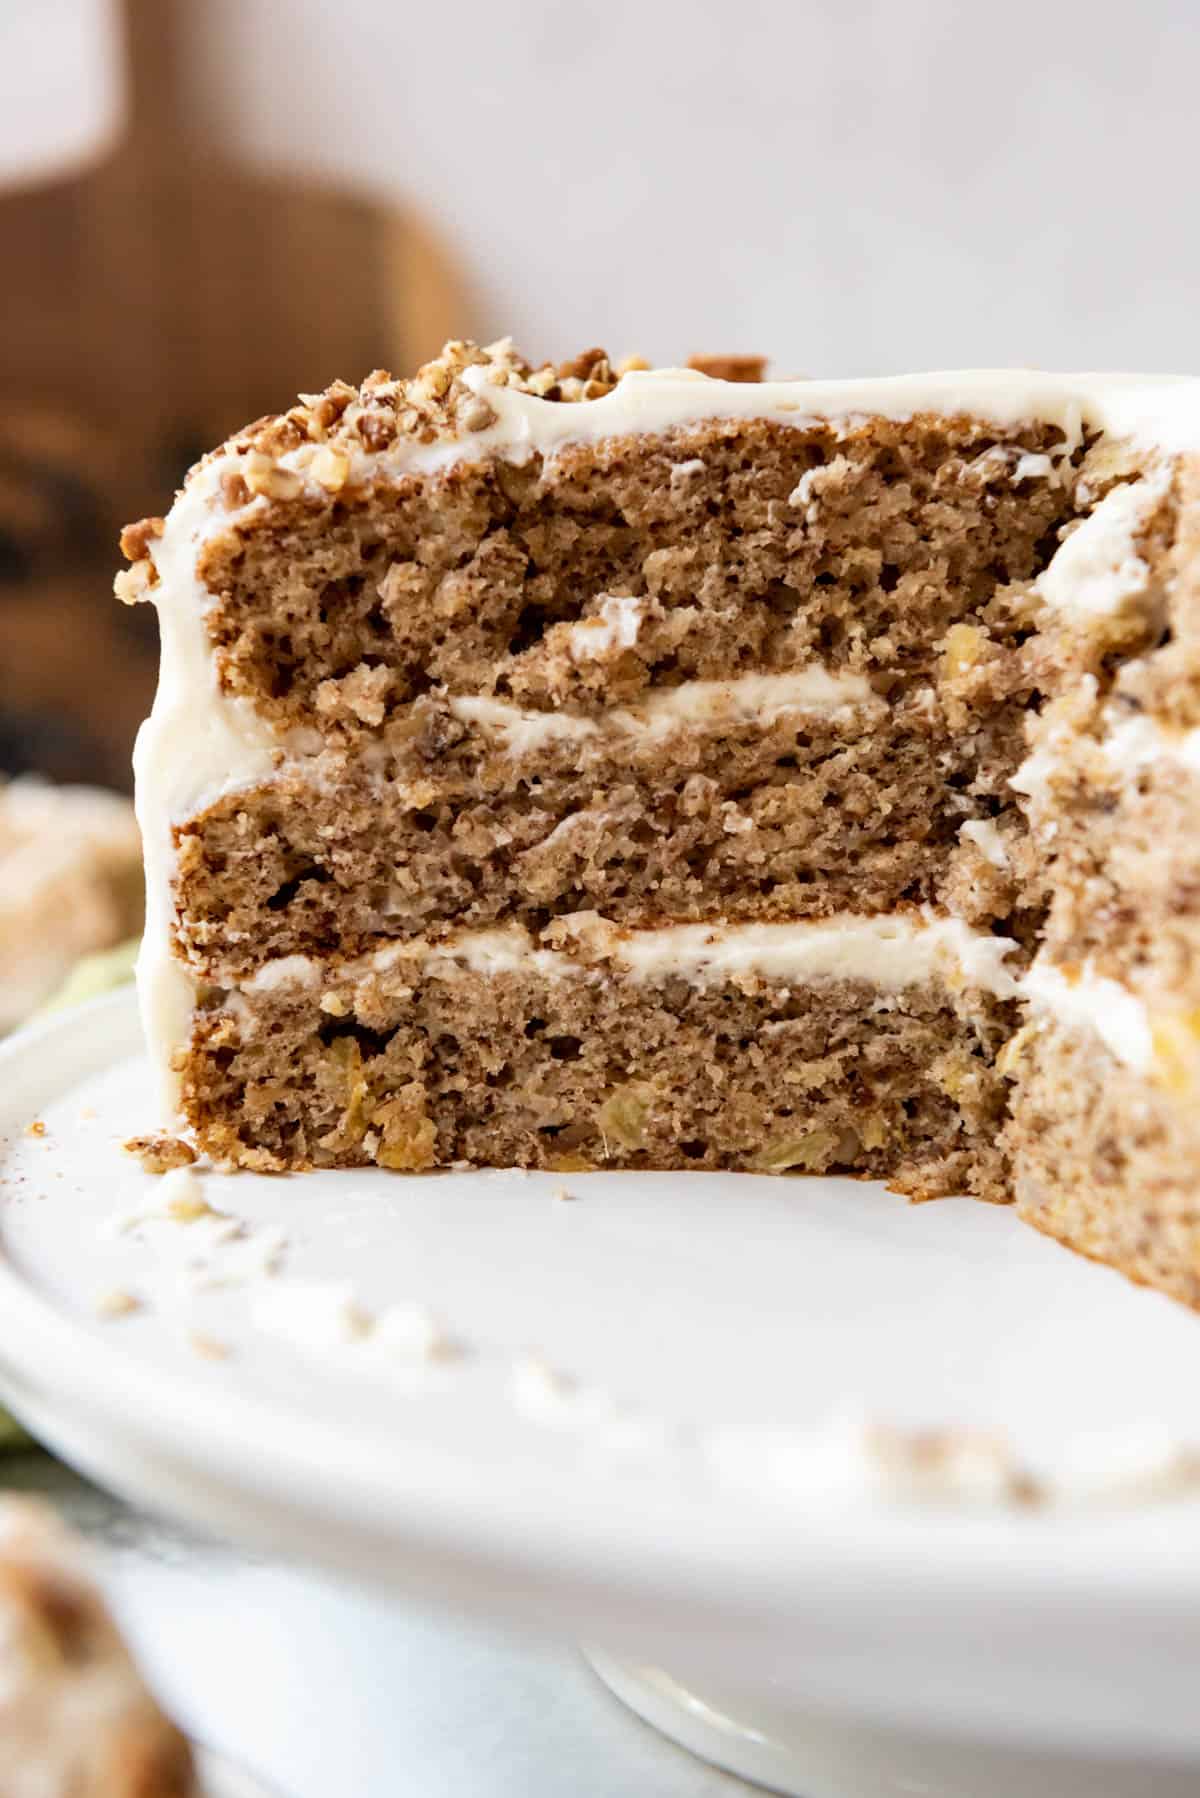 A side view of a sliced hummingbird cake.